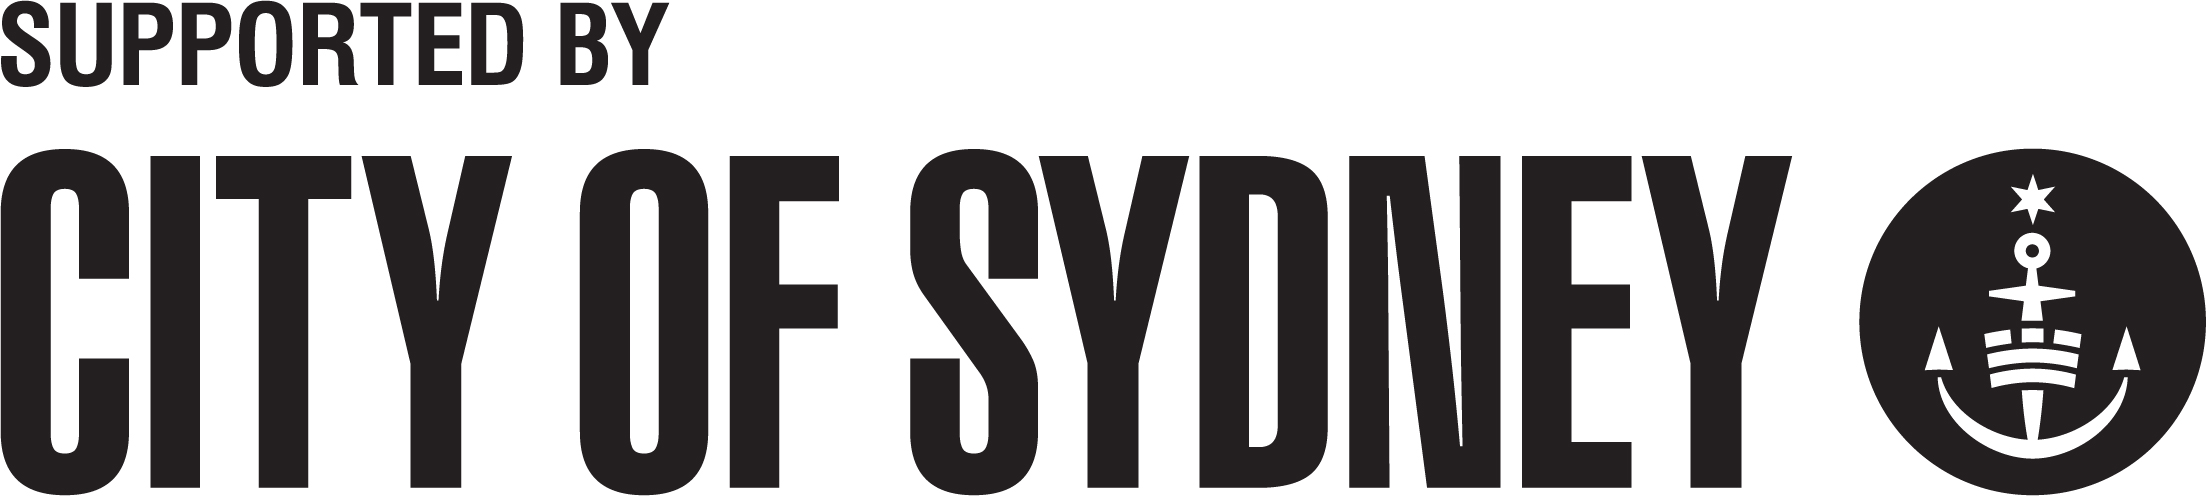 City of Sydney - supported by - Small Black - Horizontal